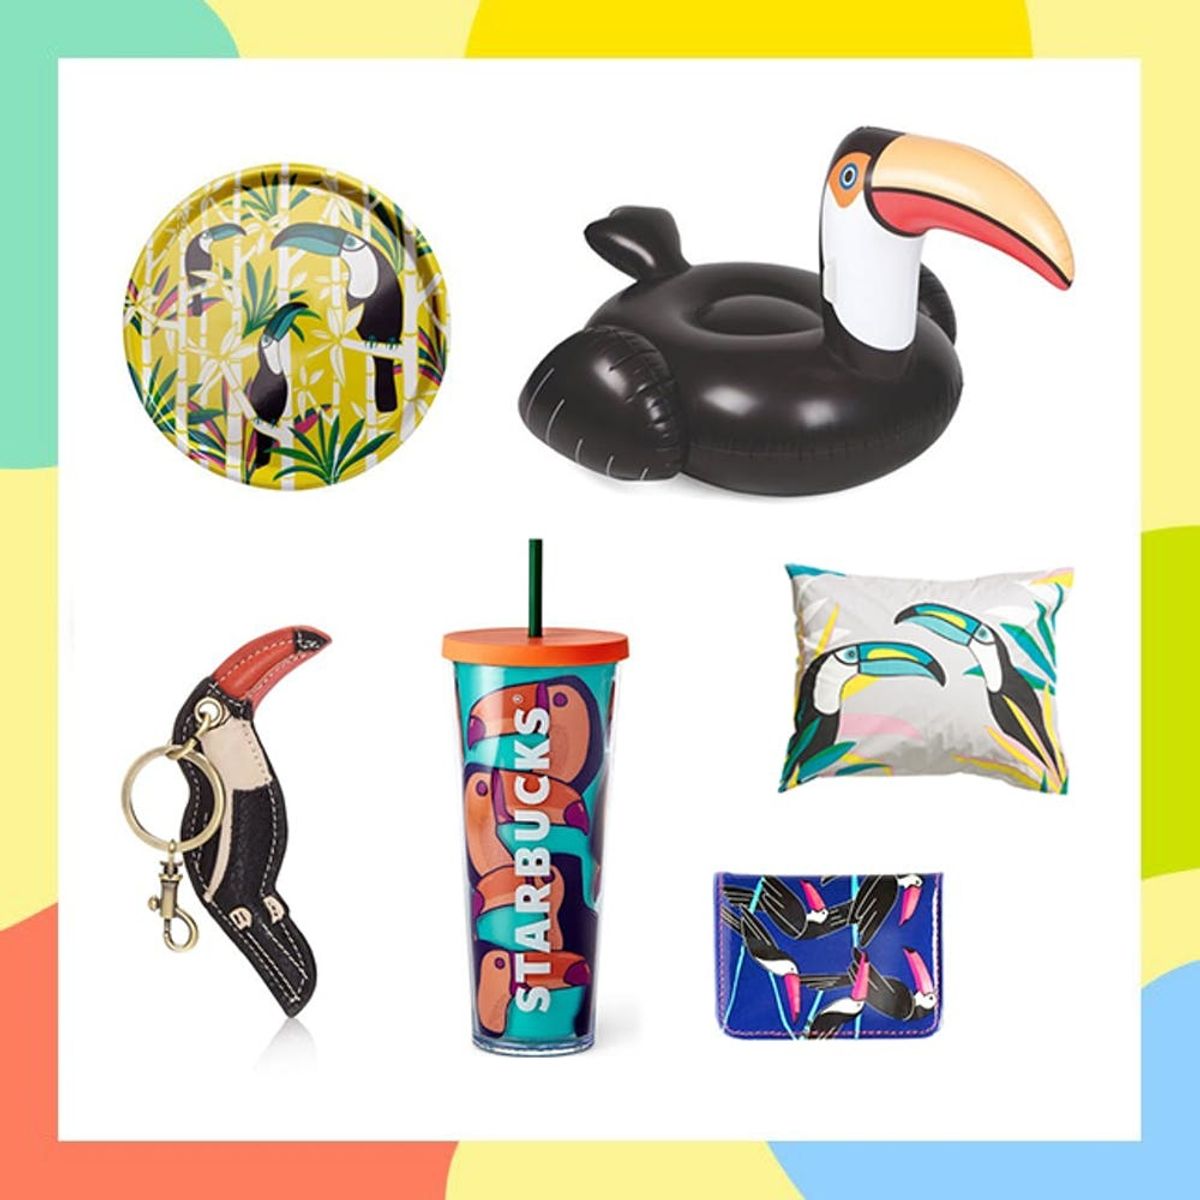 See Ya, Flamingo! 15 Ways to Embrace the Toucan Trend